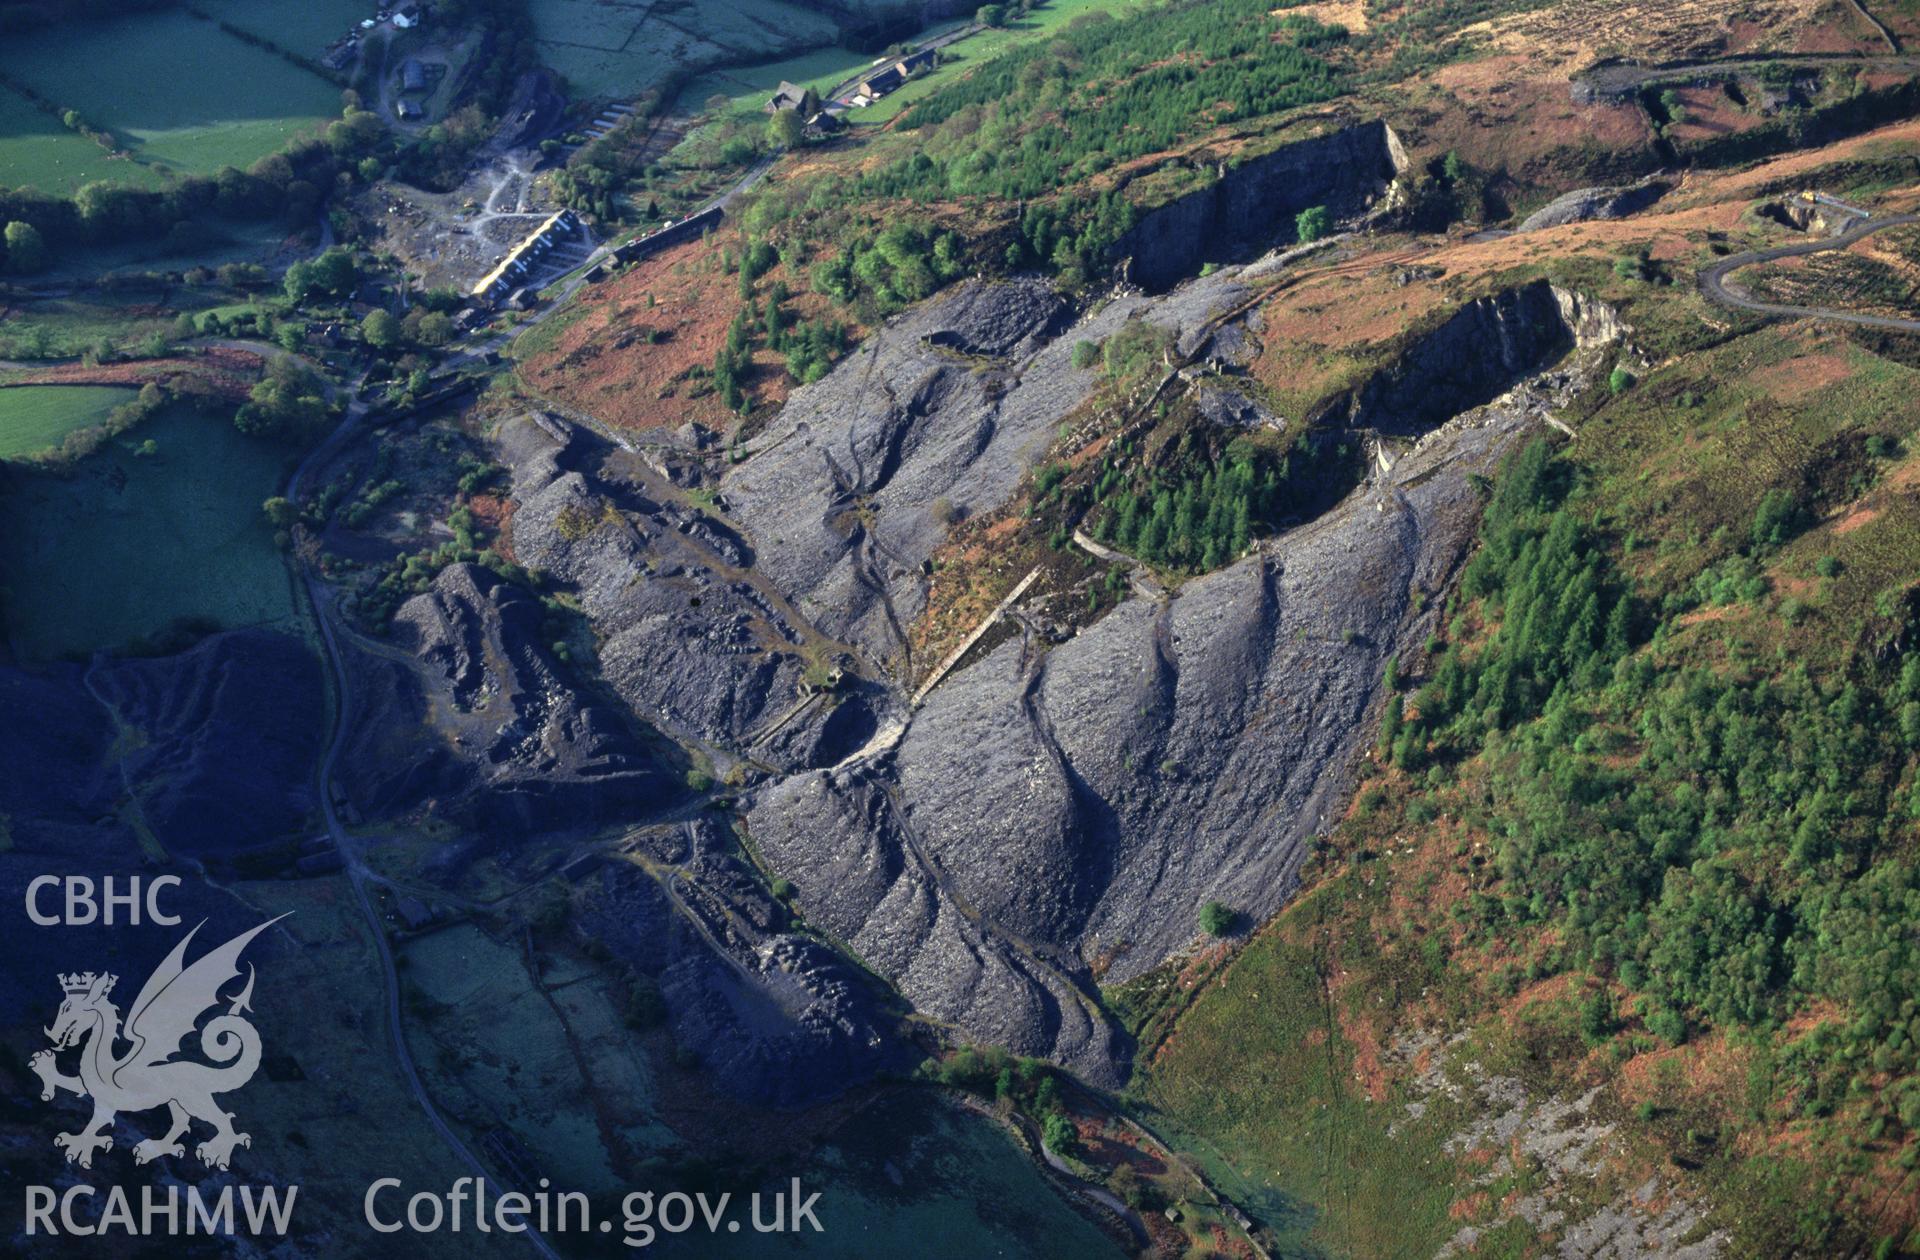 Slide of RCAHMW colour oblique aerial photograph of Aberllefenni Slate Quarry, taken by C.R. Musson, 4/5/1993.